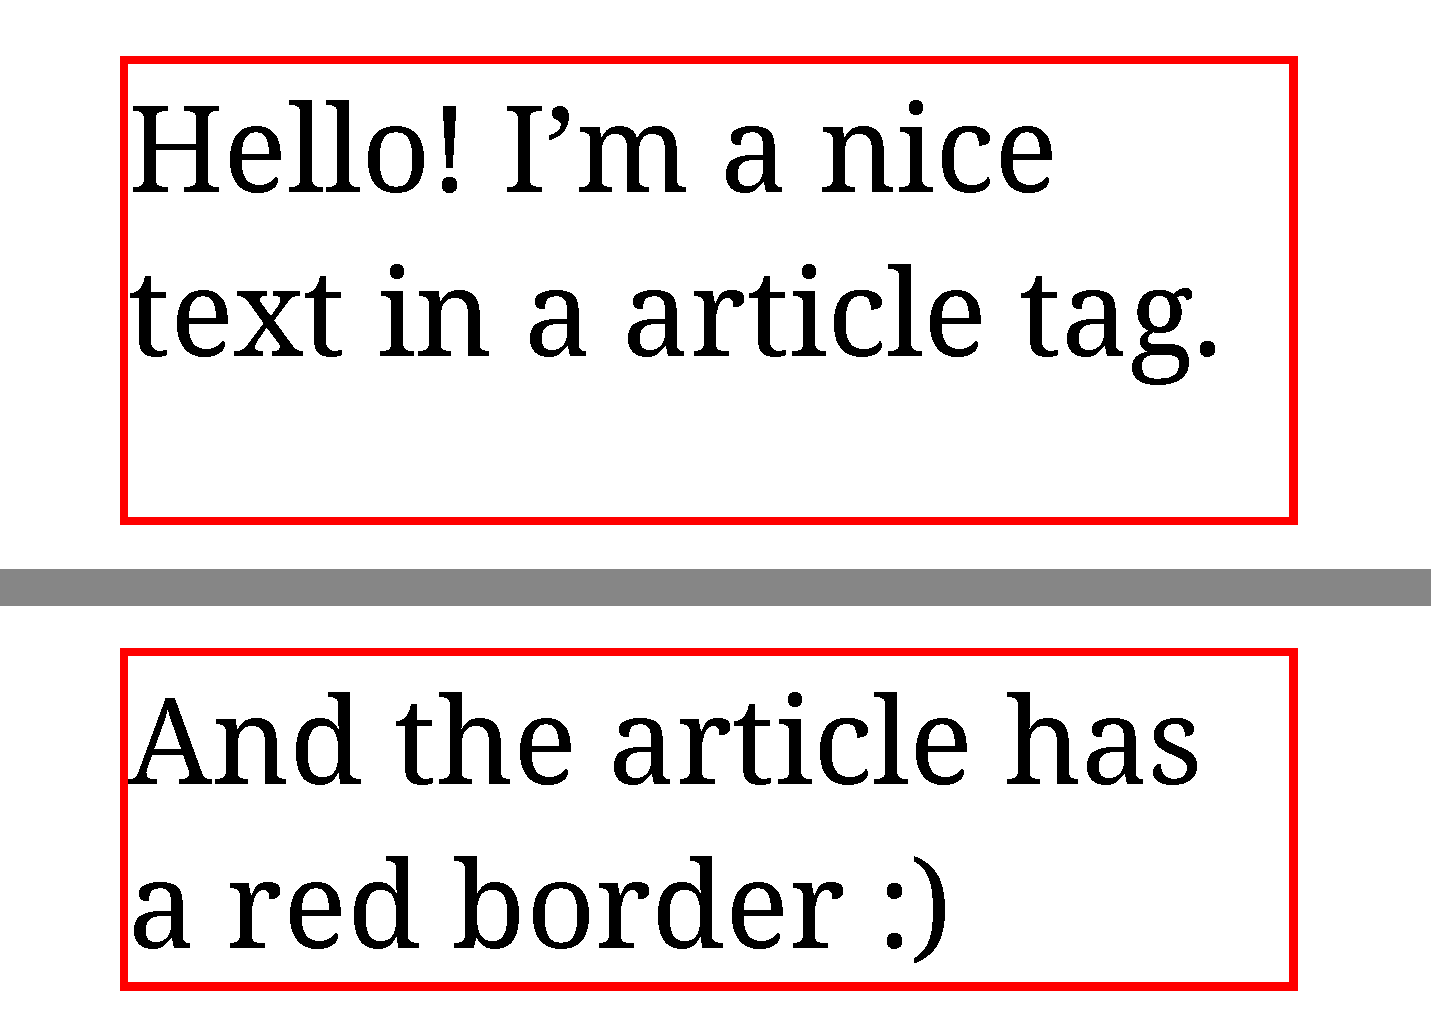 Example of an article with borders repeating on page break